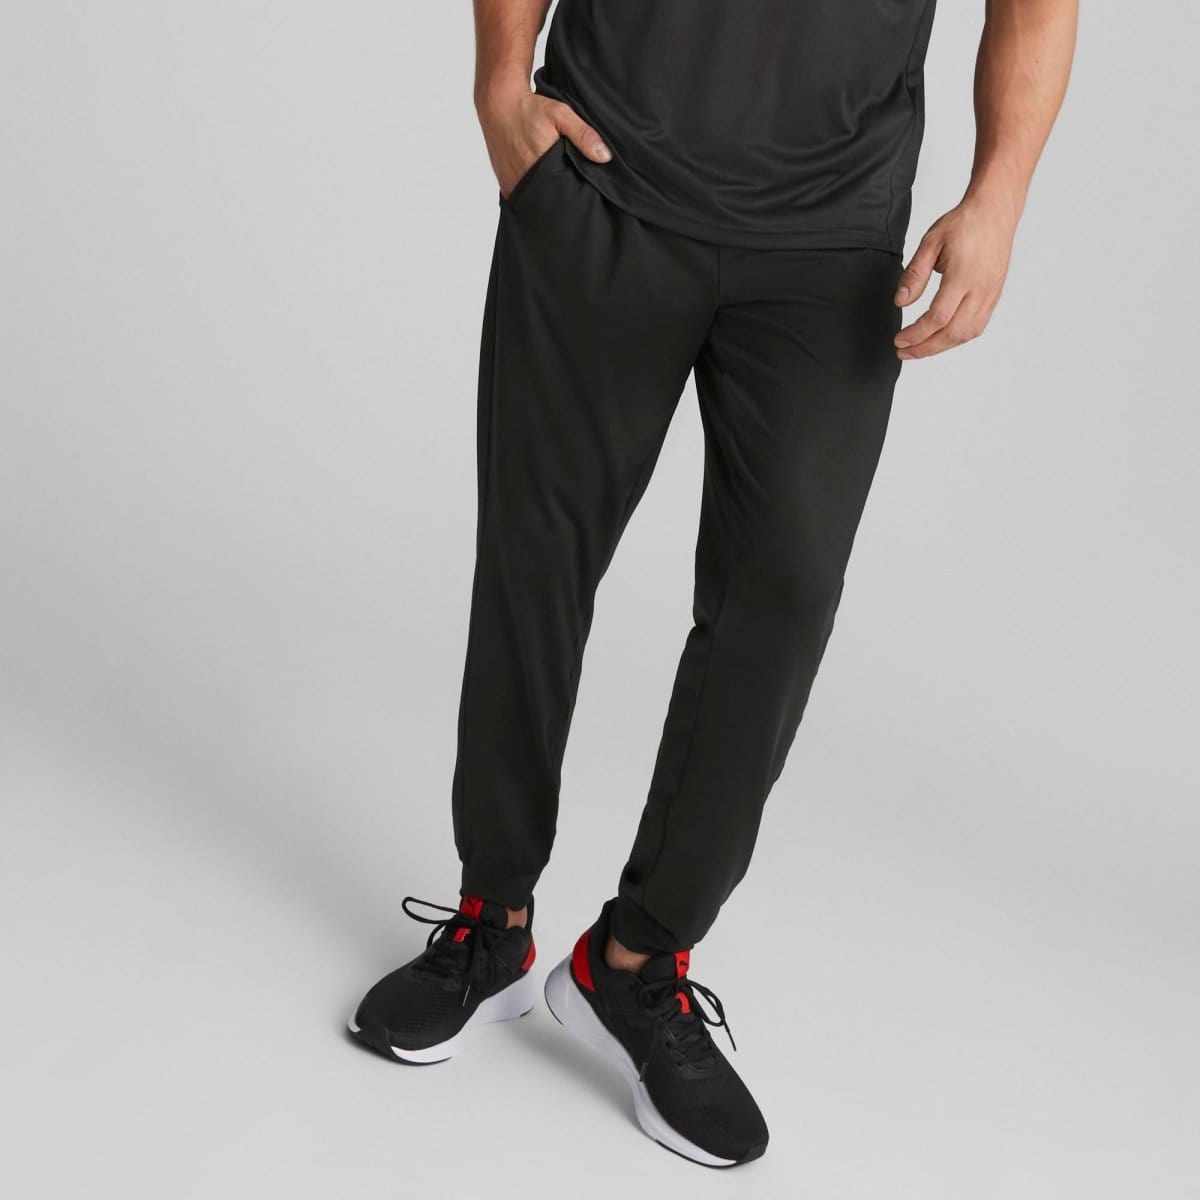 Puma Track Pants. AU Stock (Red & Navy Black available)